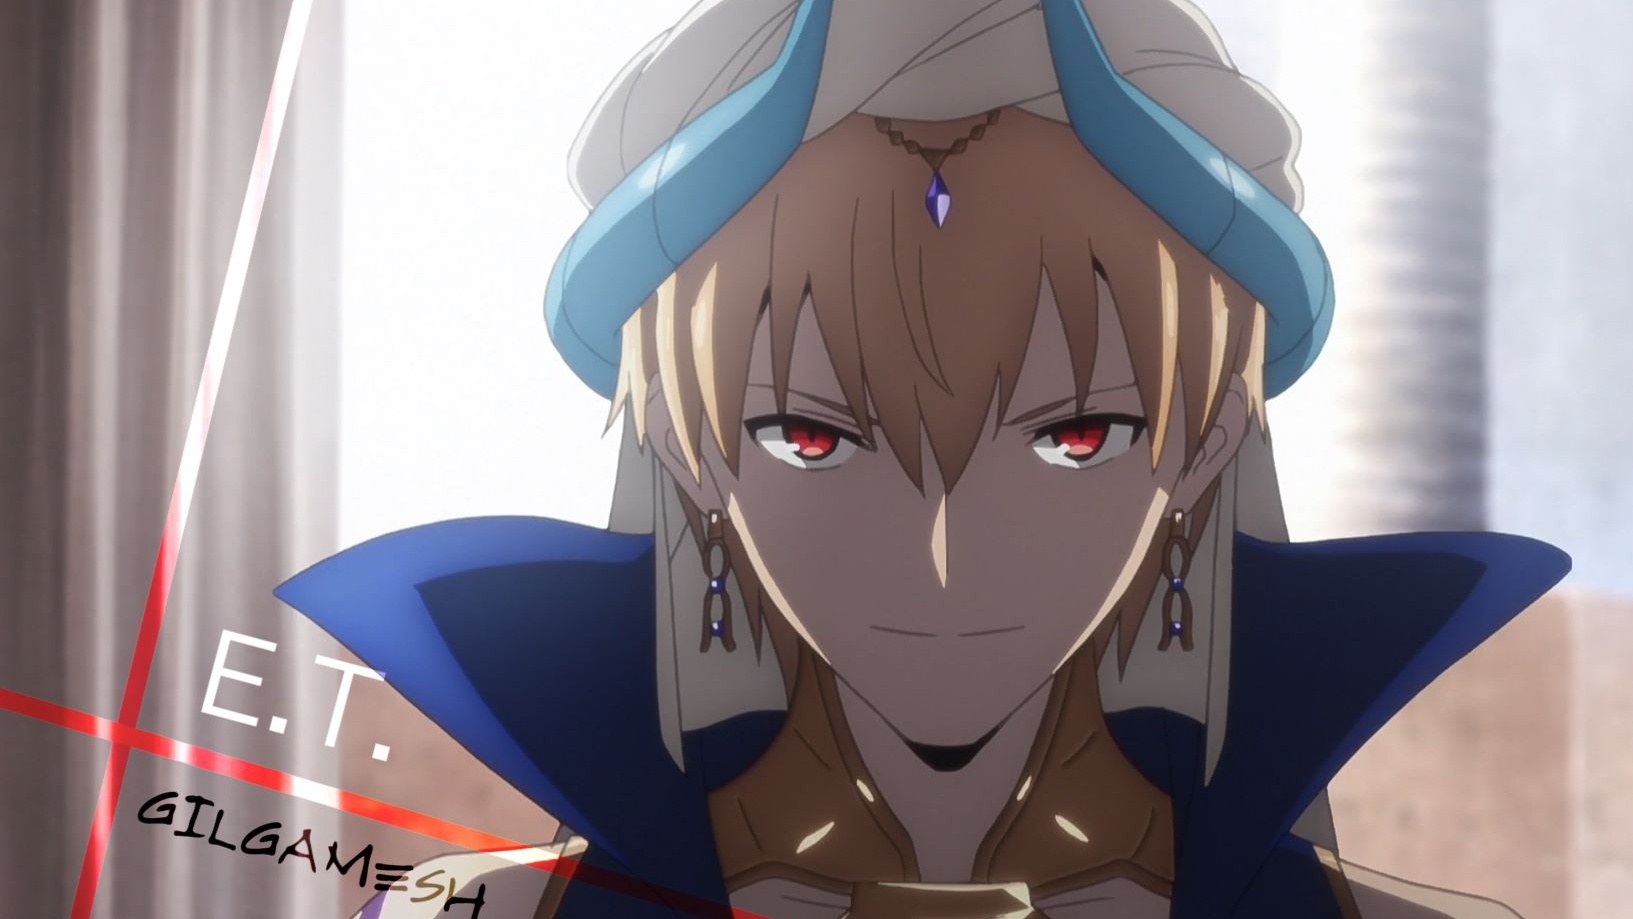 Gilgamesh from the action anime [Fate/Grand Order] : r/bishounen